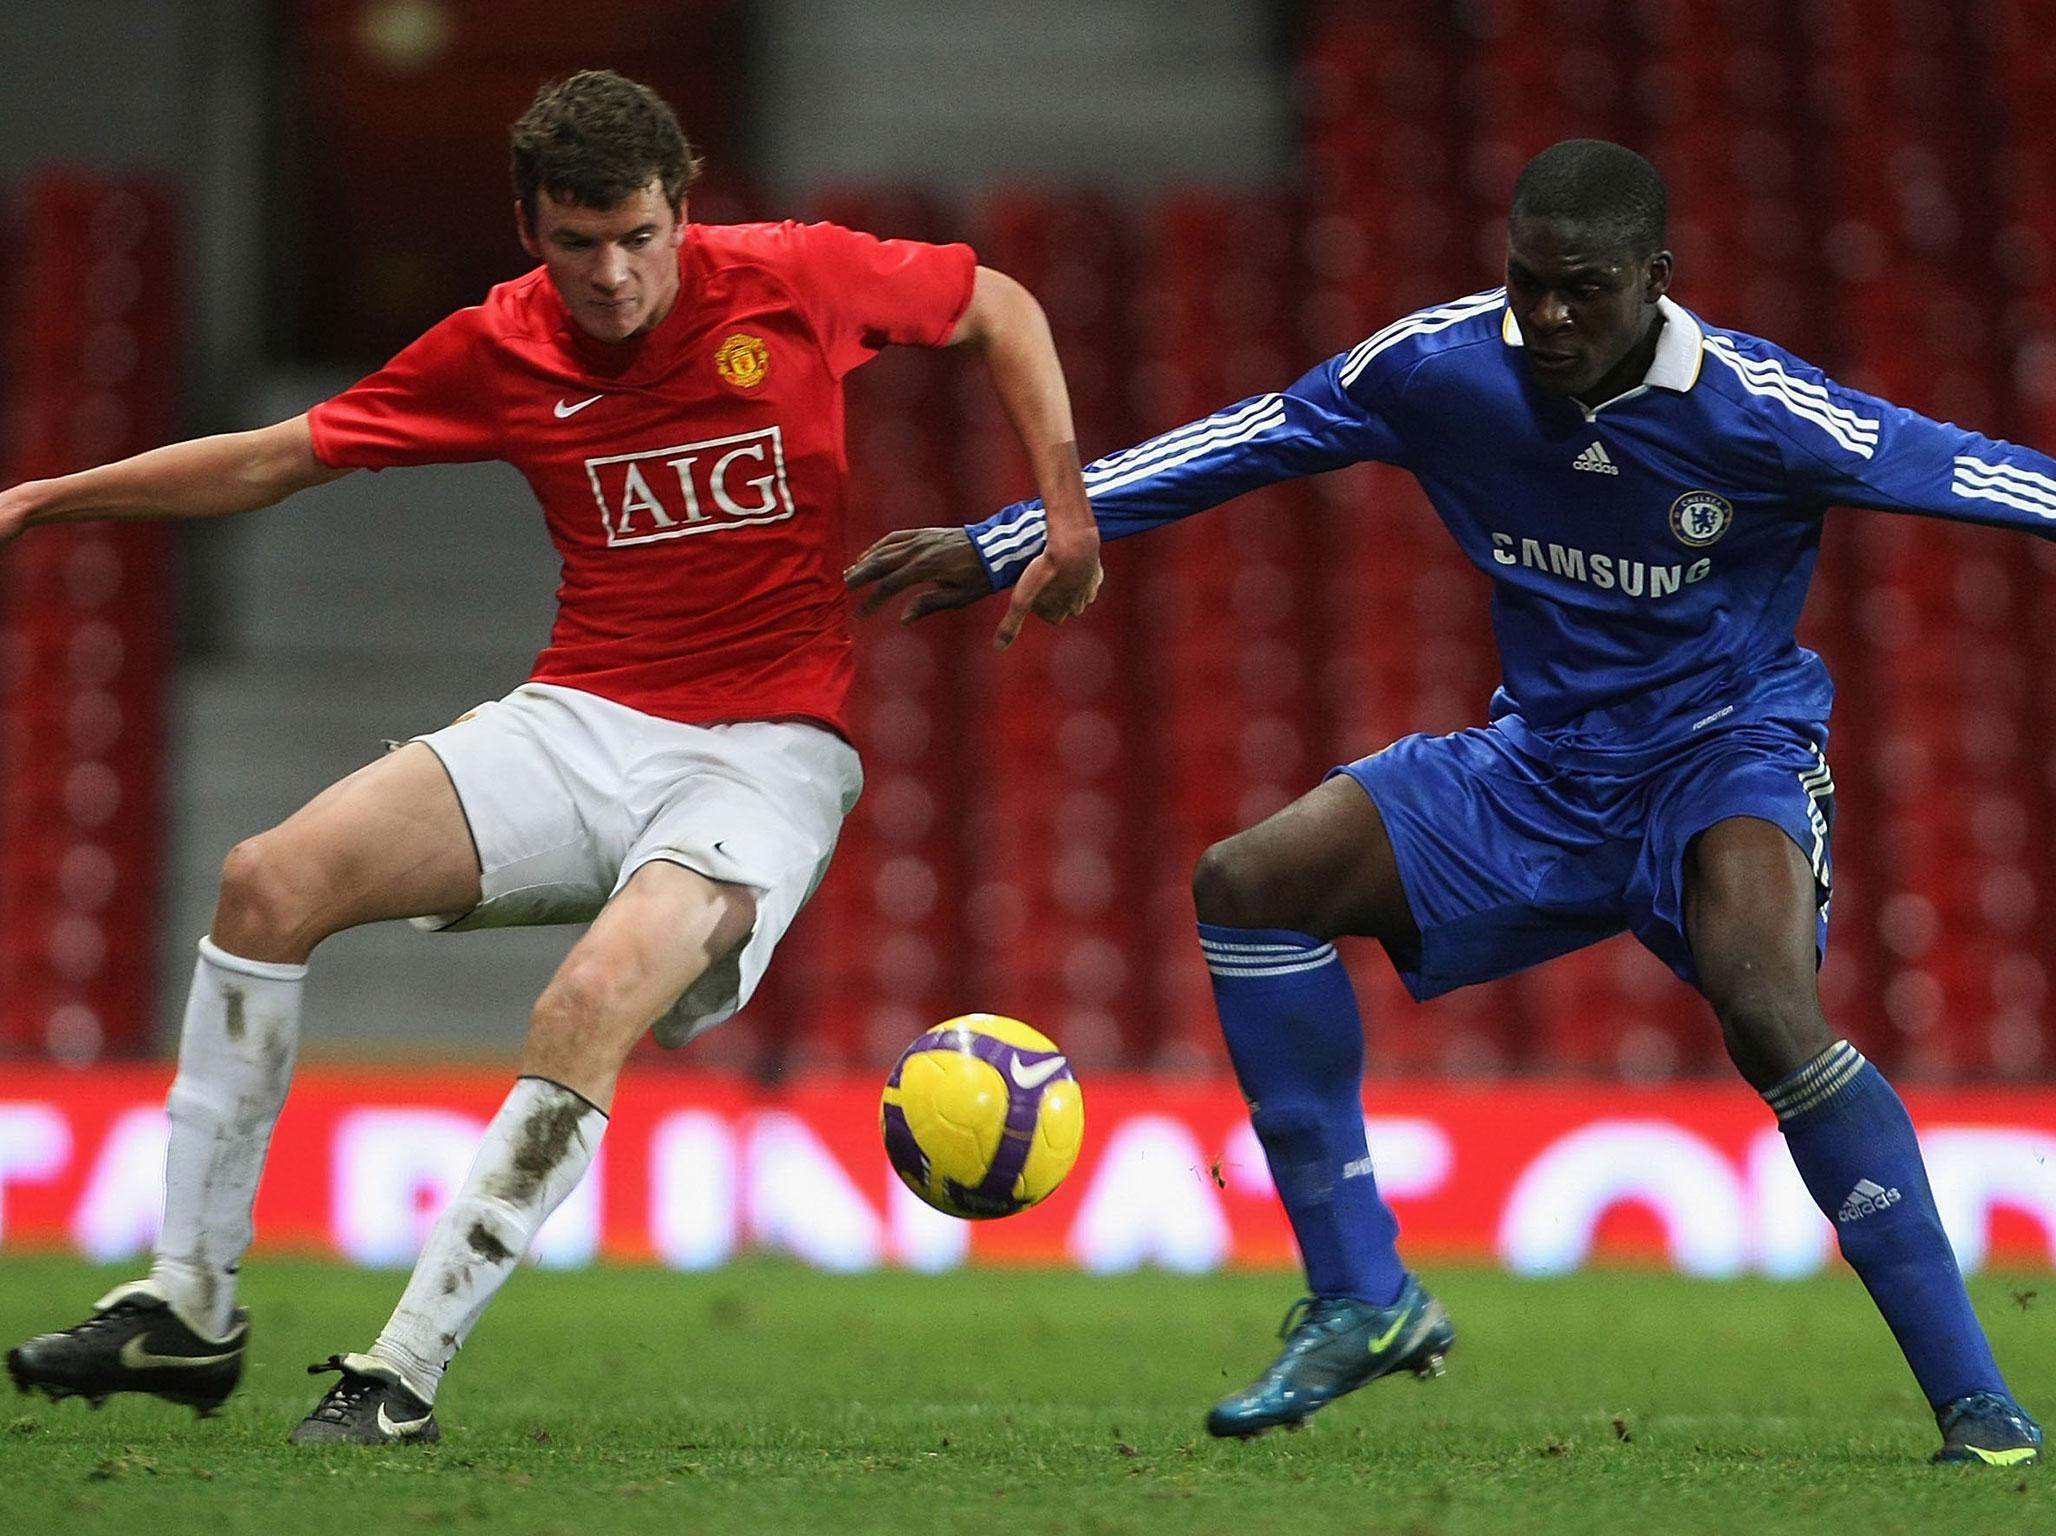 &#13;
Gill was a regular in United's reserves &#13;